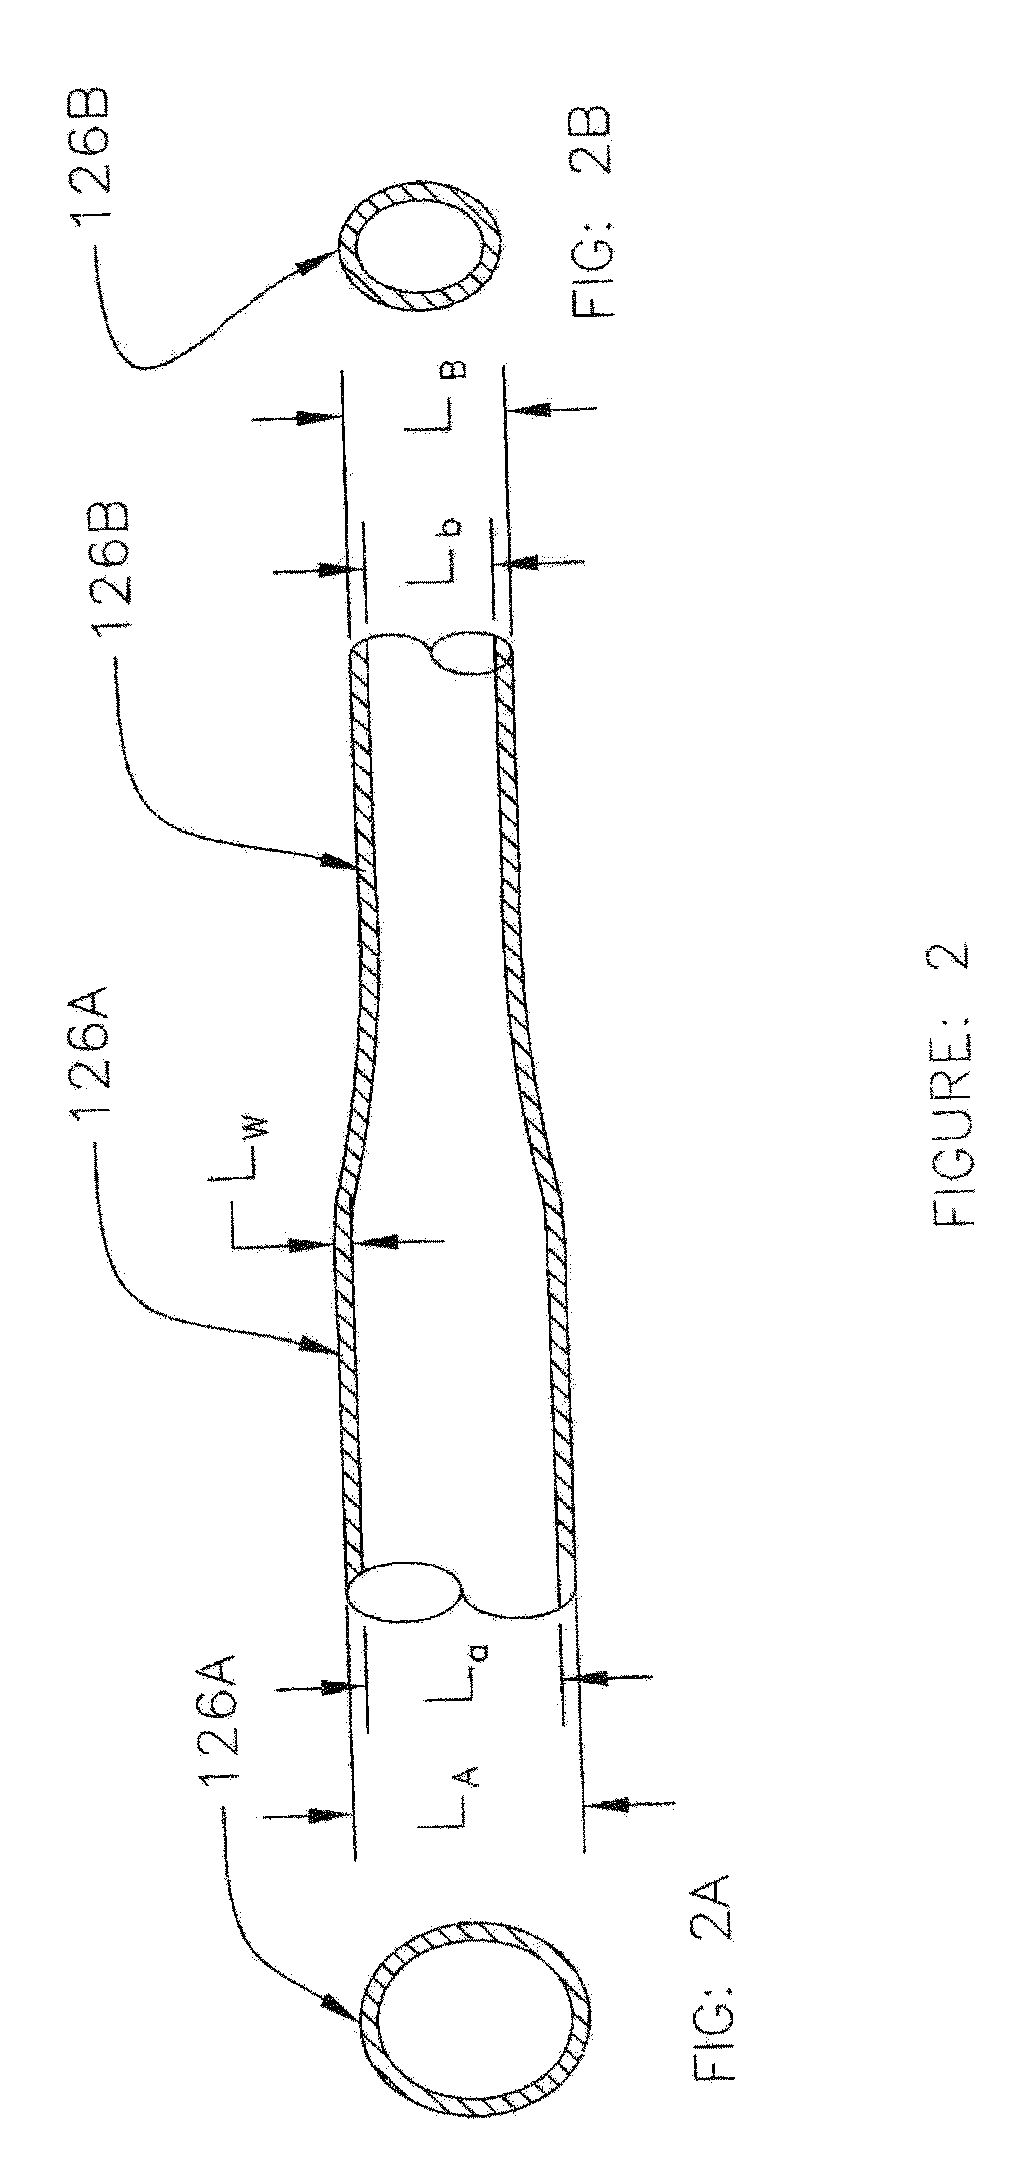 Apparatus and method for real time measurement of a constituent of blood to monitor blood volume